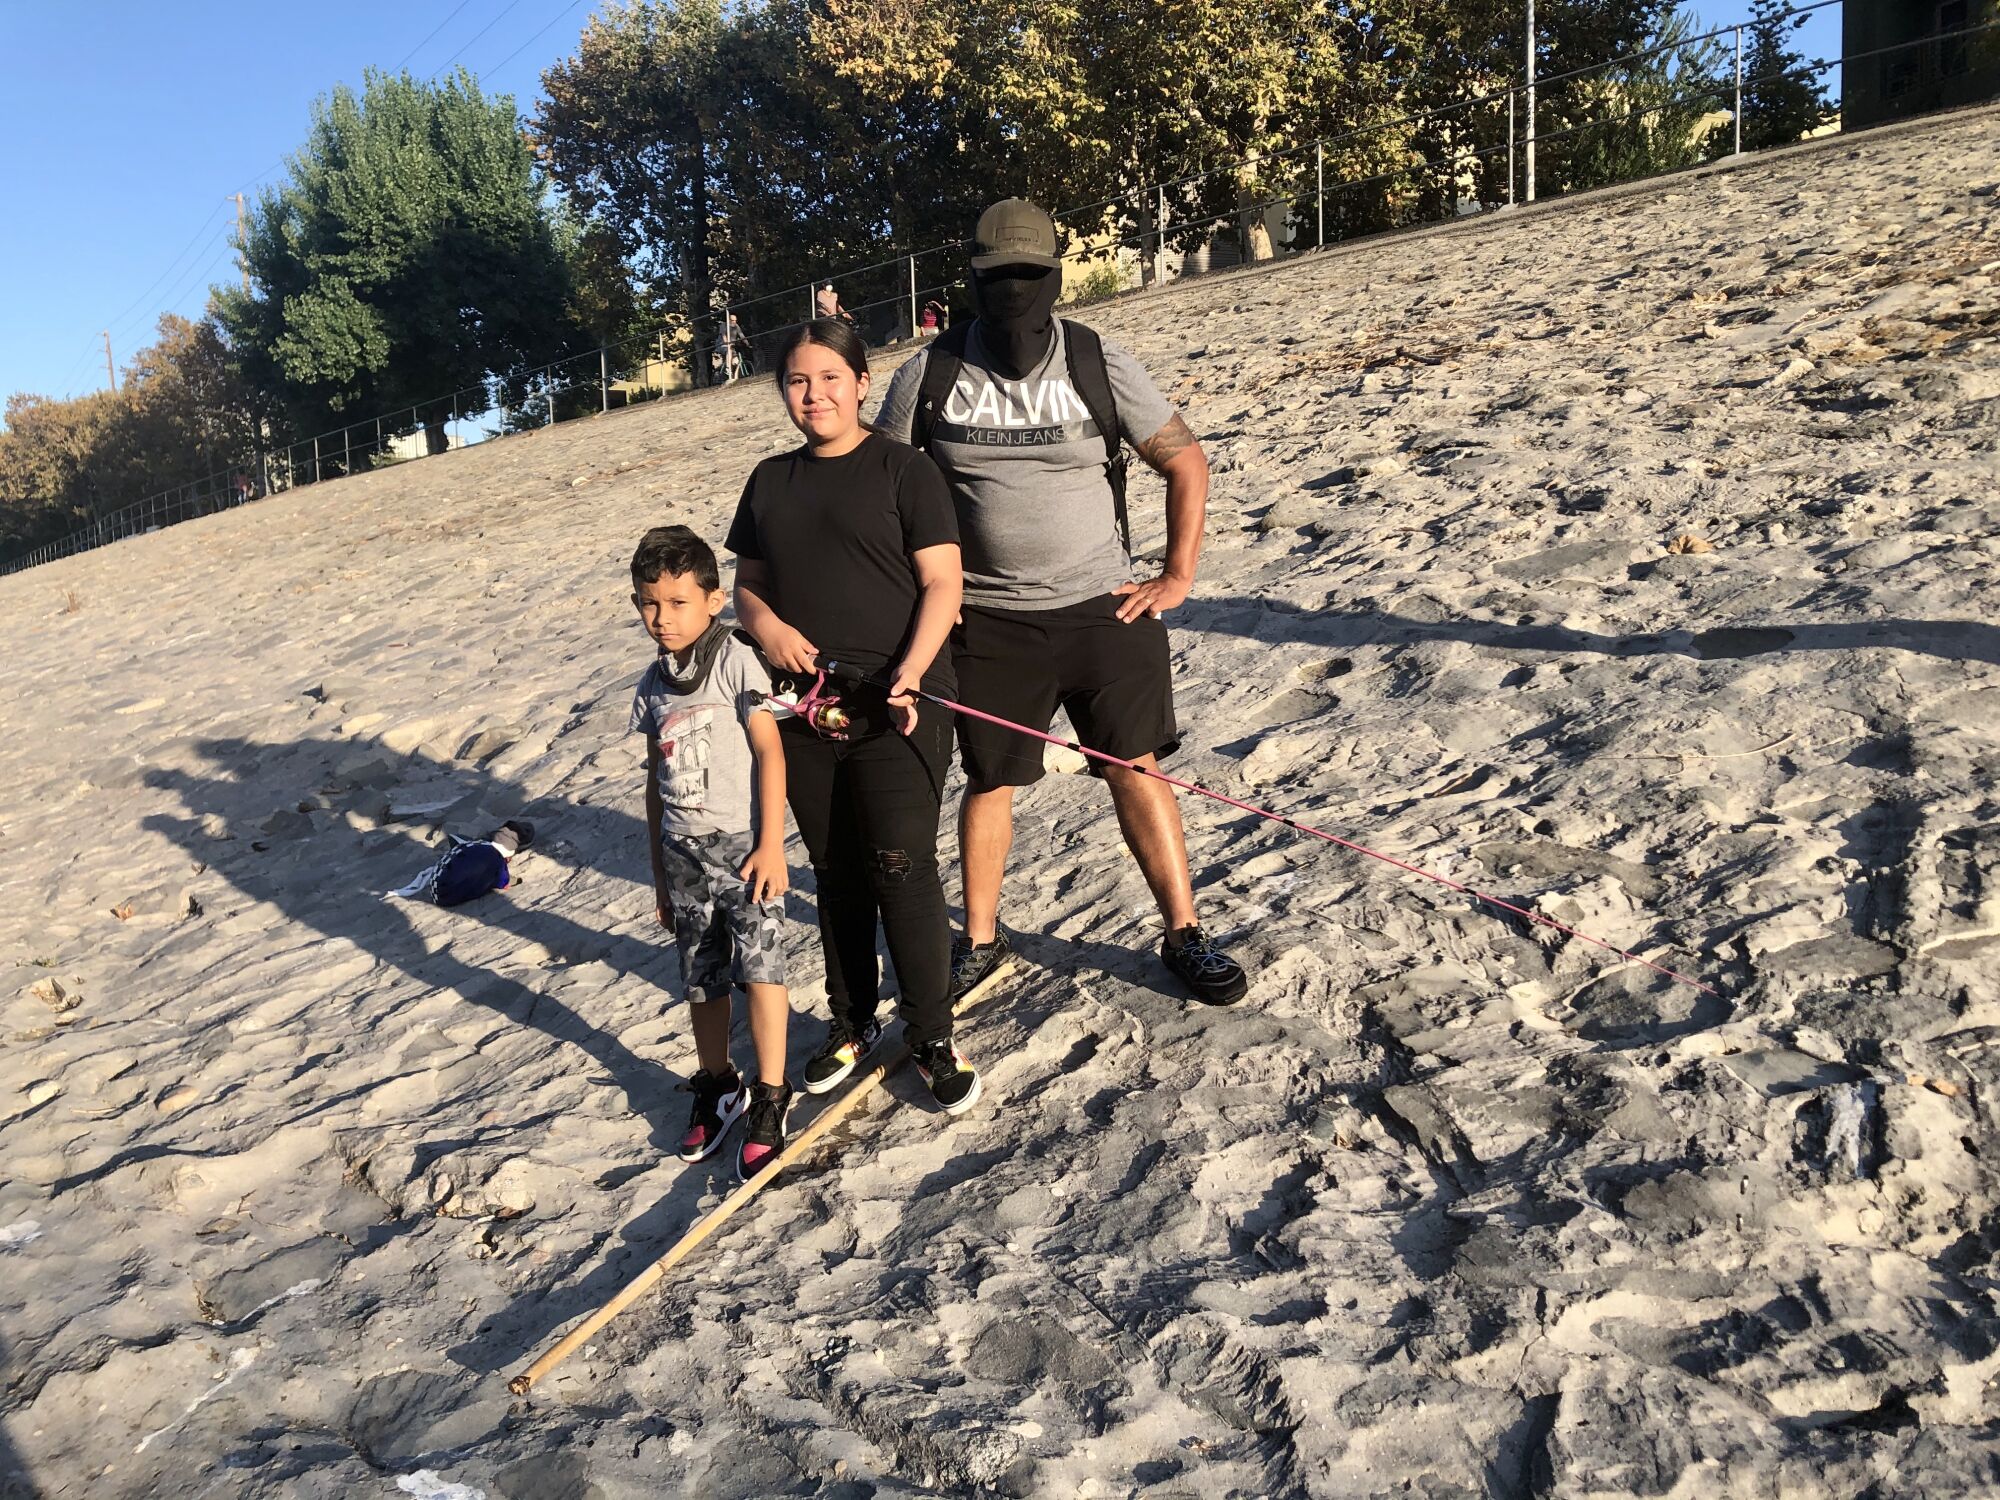 The Reyes family fishes at the L.A. River on a warm afternoon.